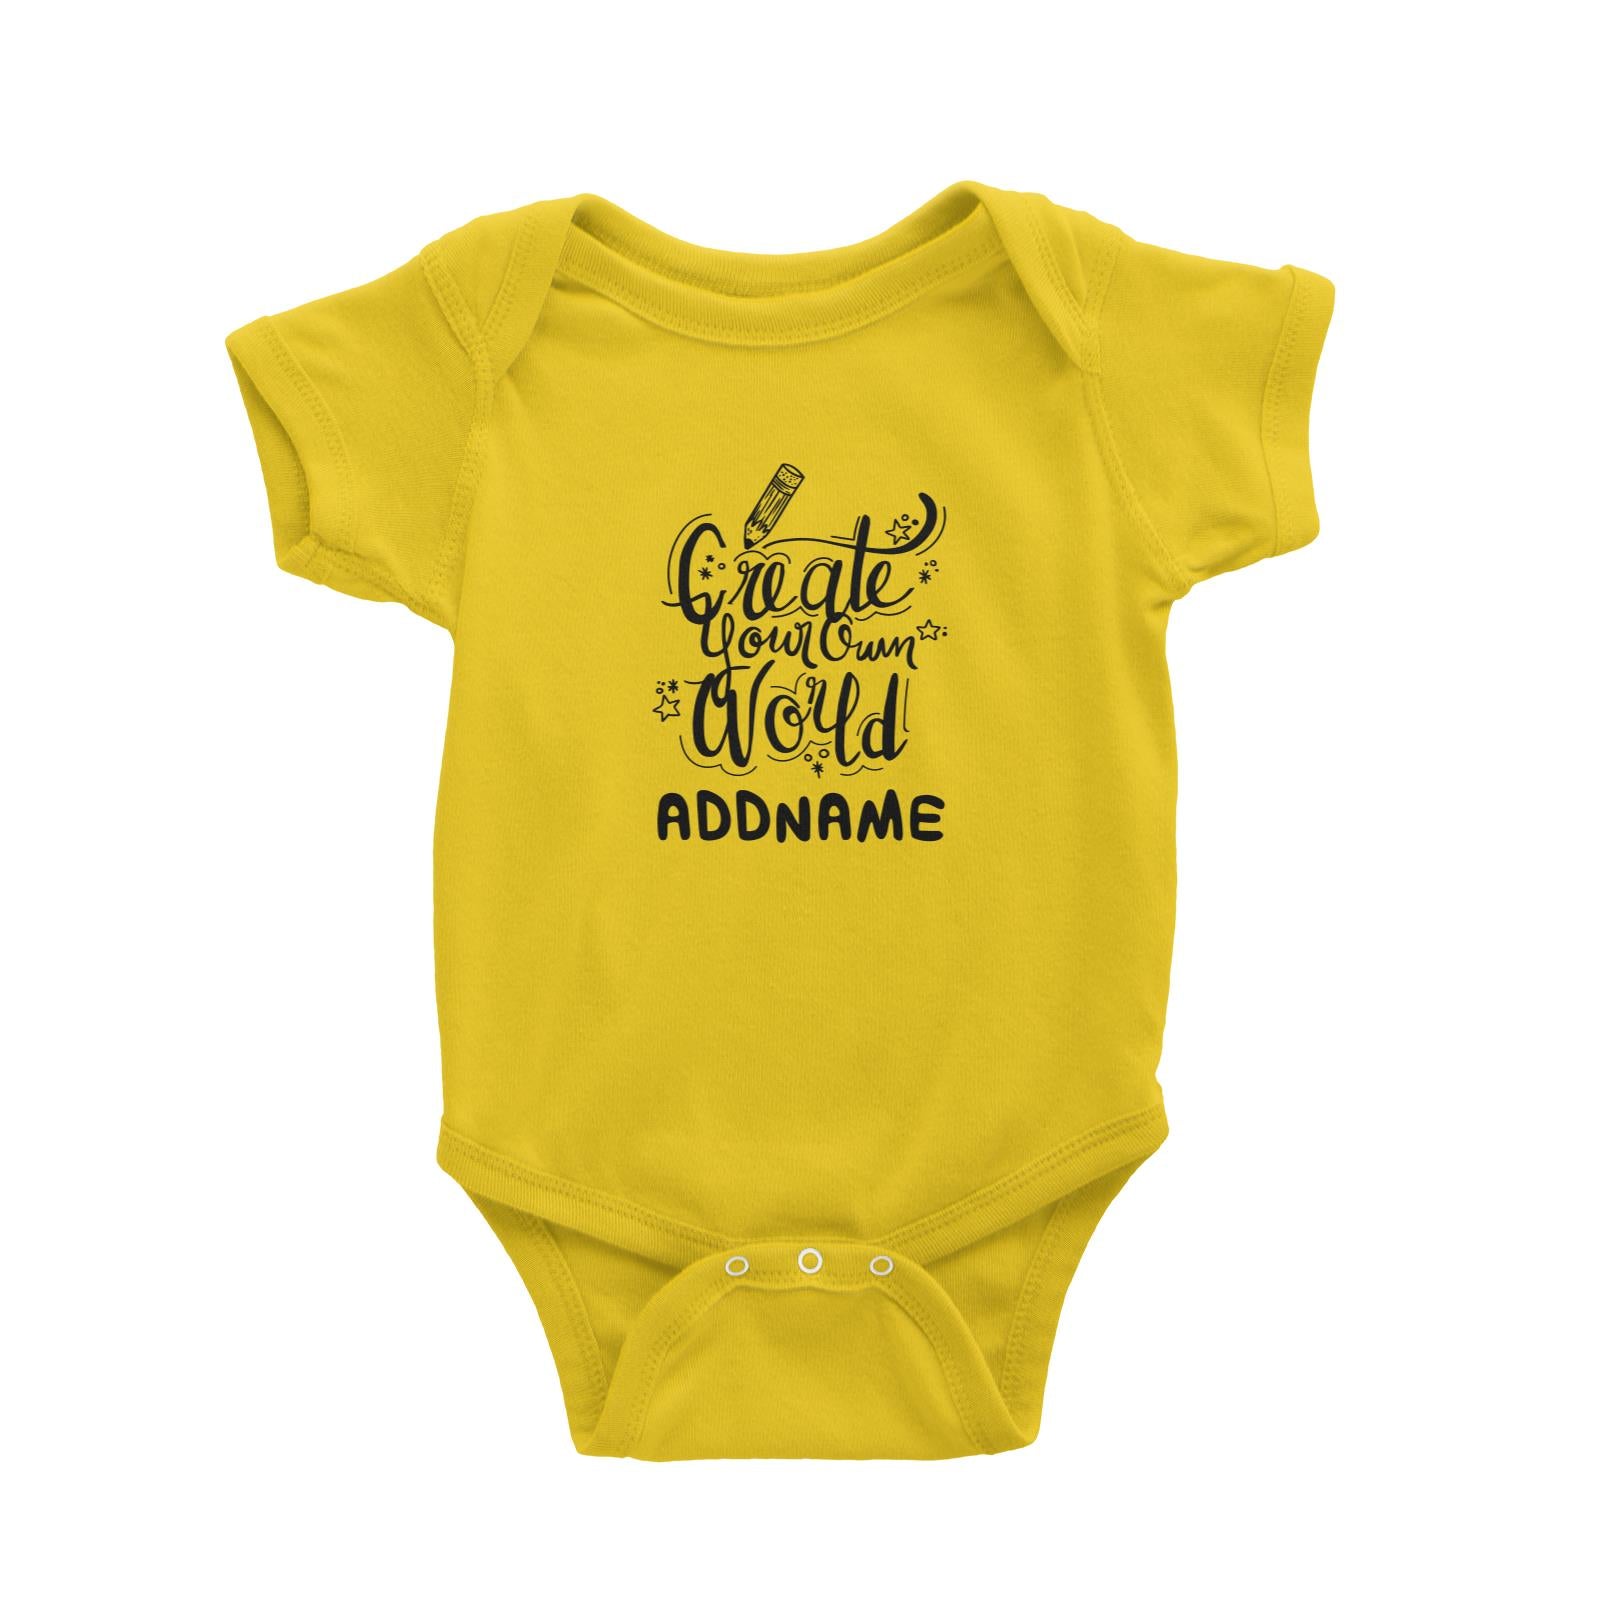 Children's Day Gift Series Create Your Own World Addname Baby Romper